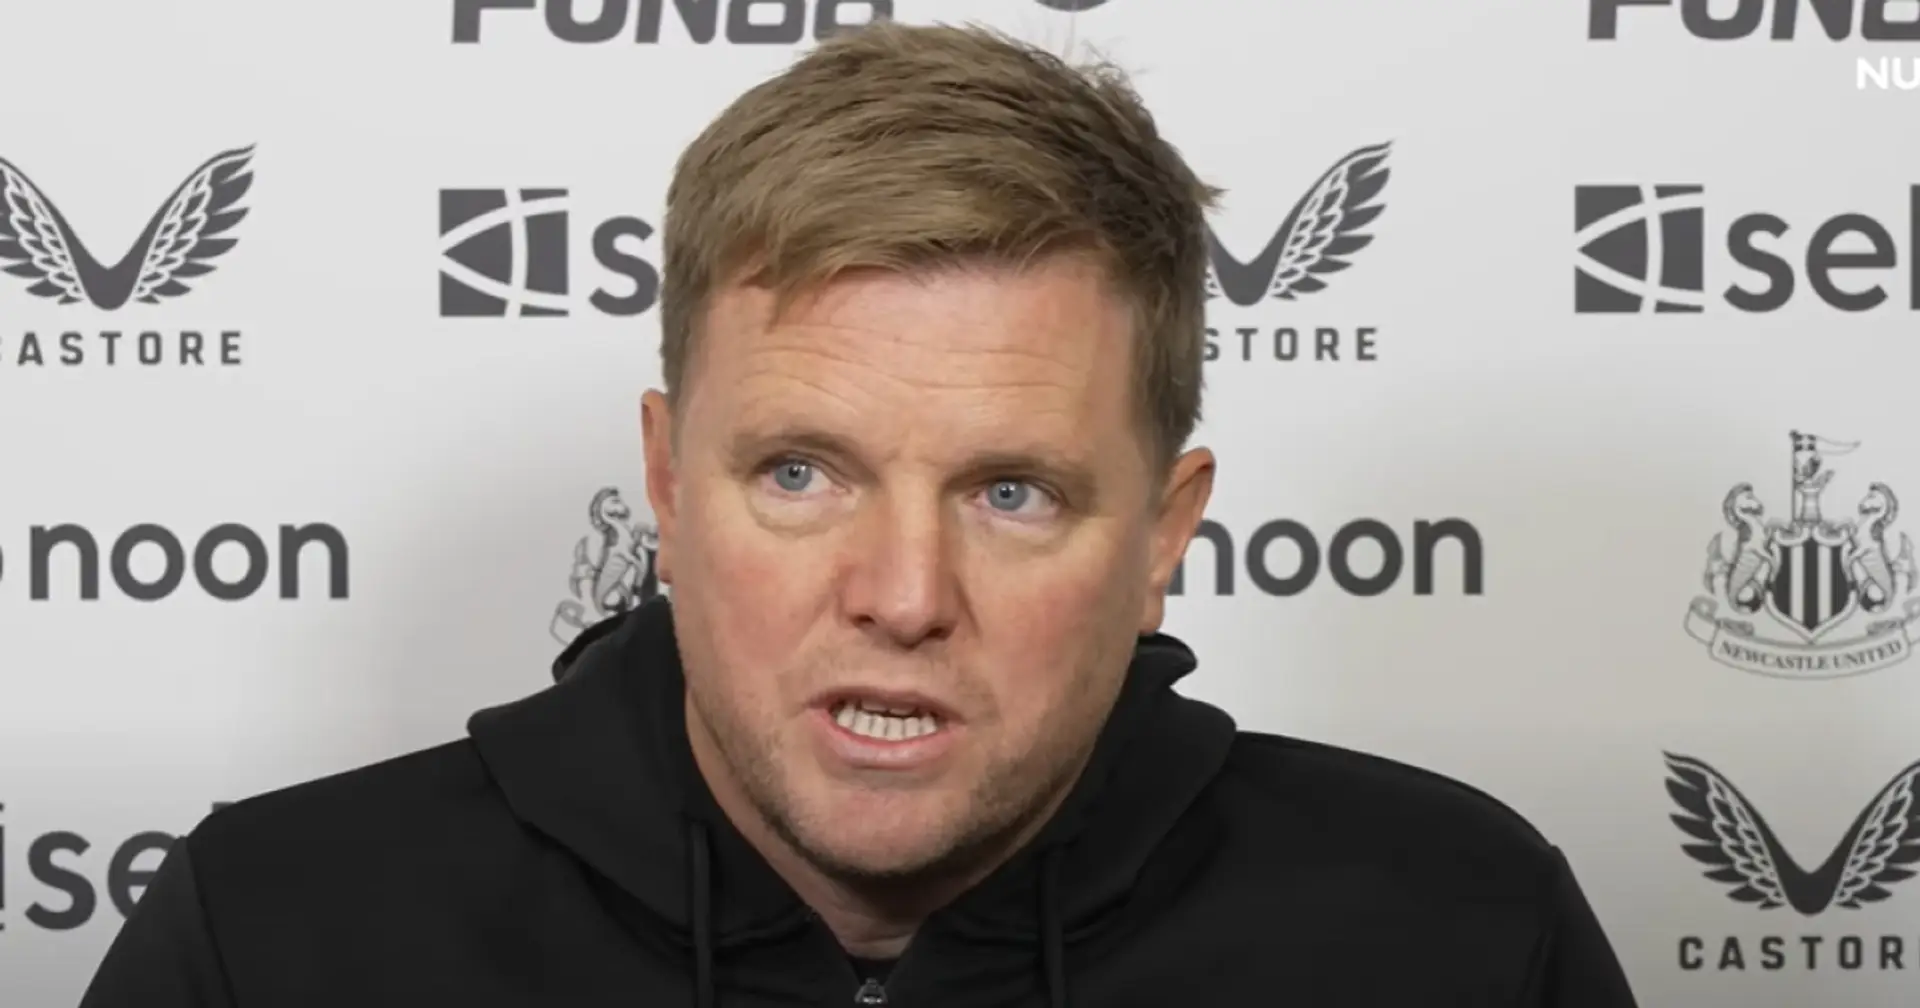 'I found it a bit strange': Eddie Howe can't understand why the focus is solely on Newcastle after PL vote